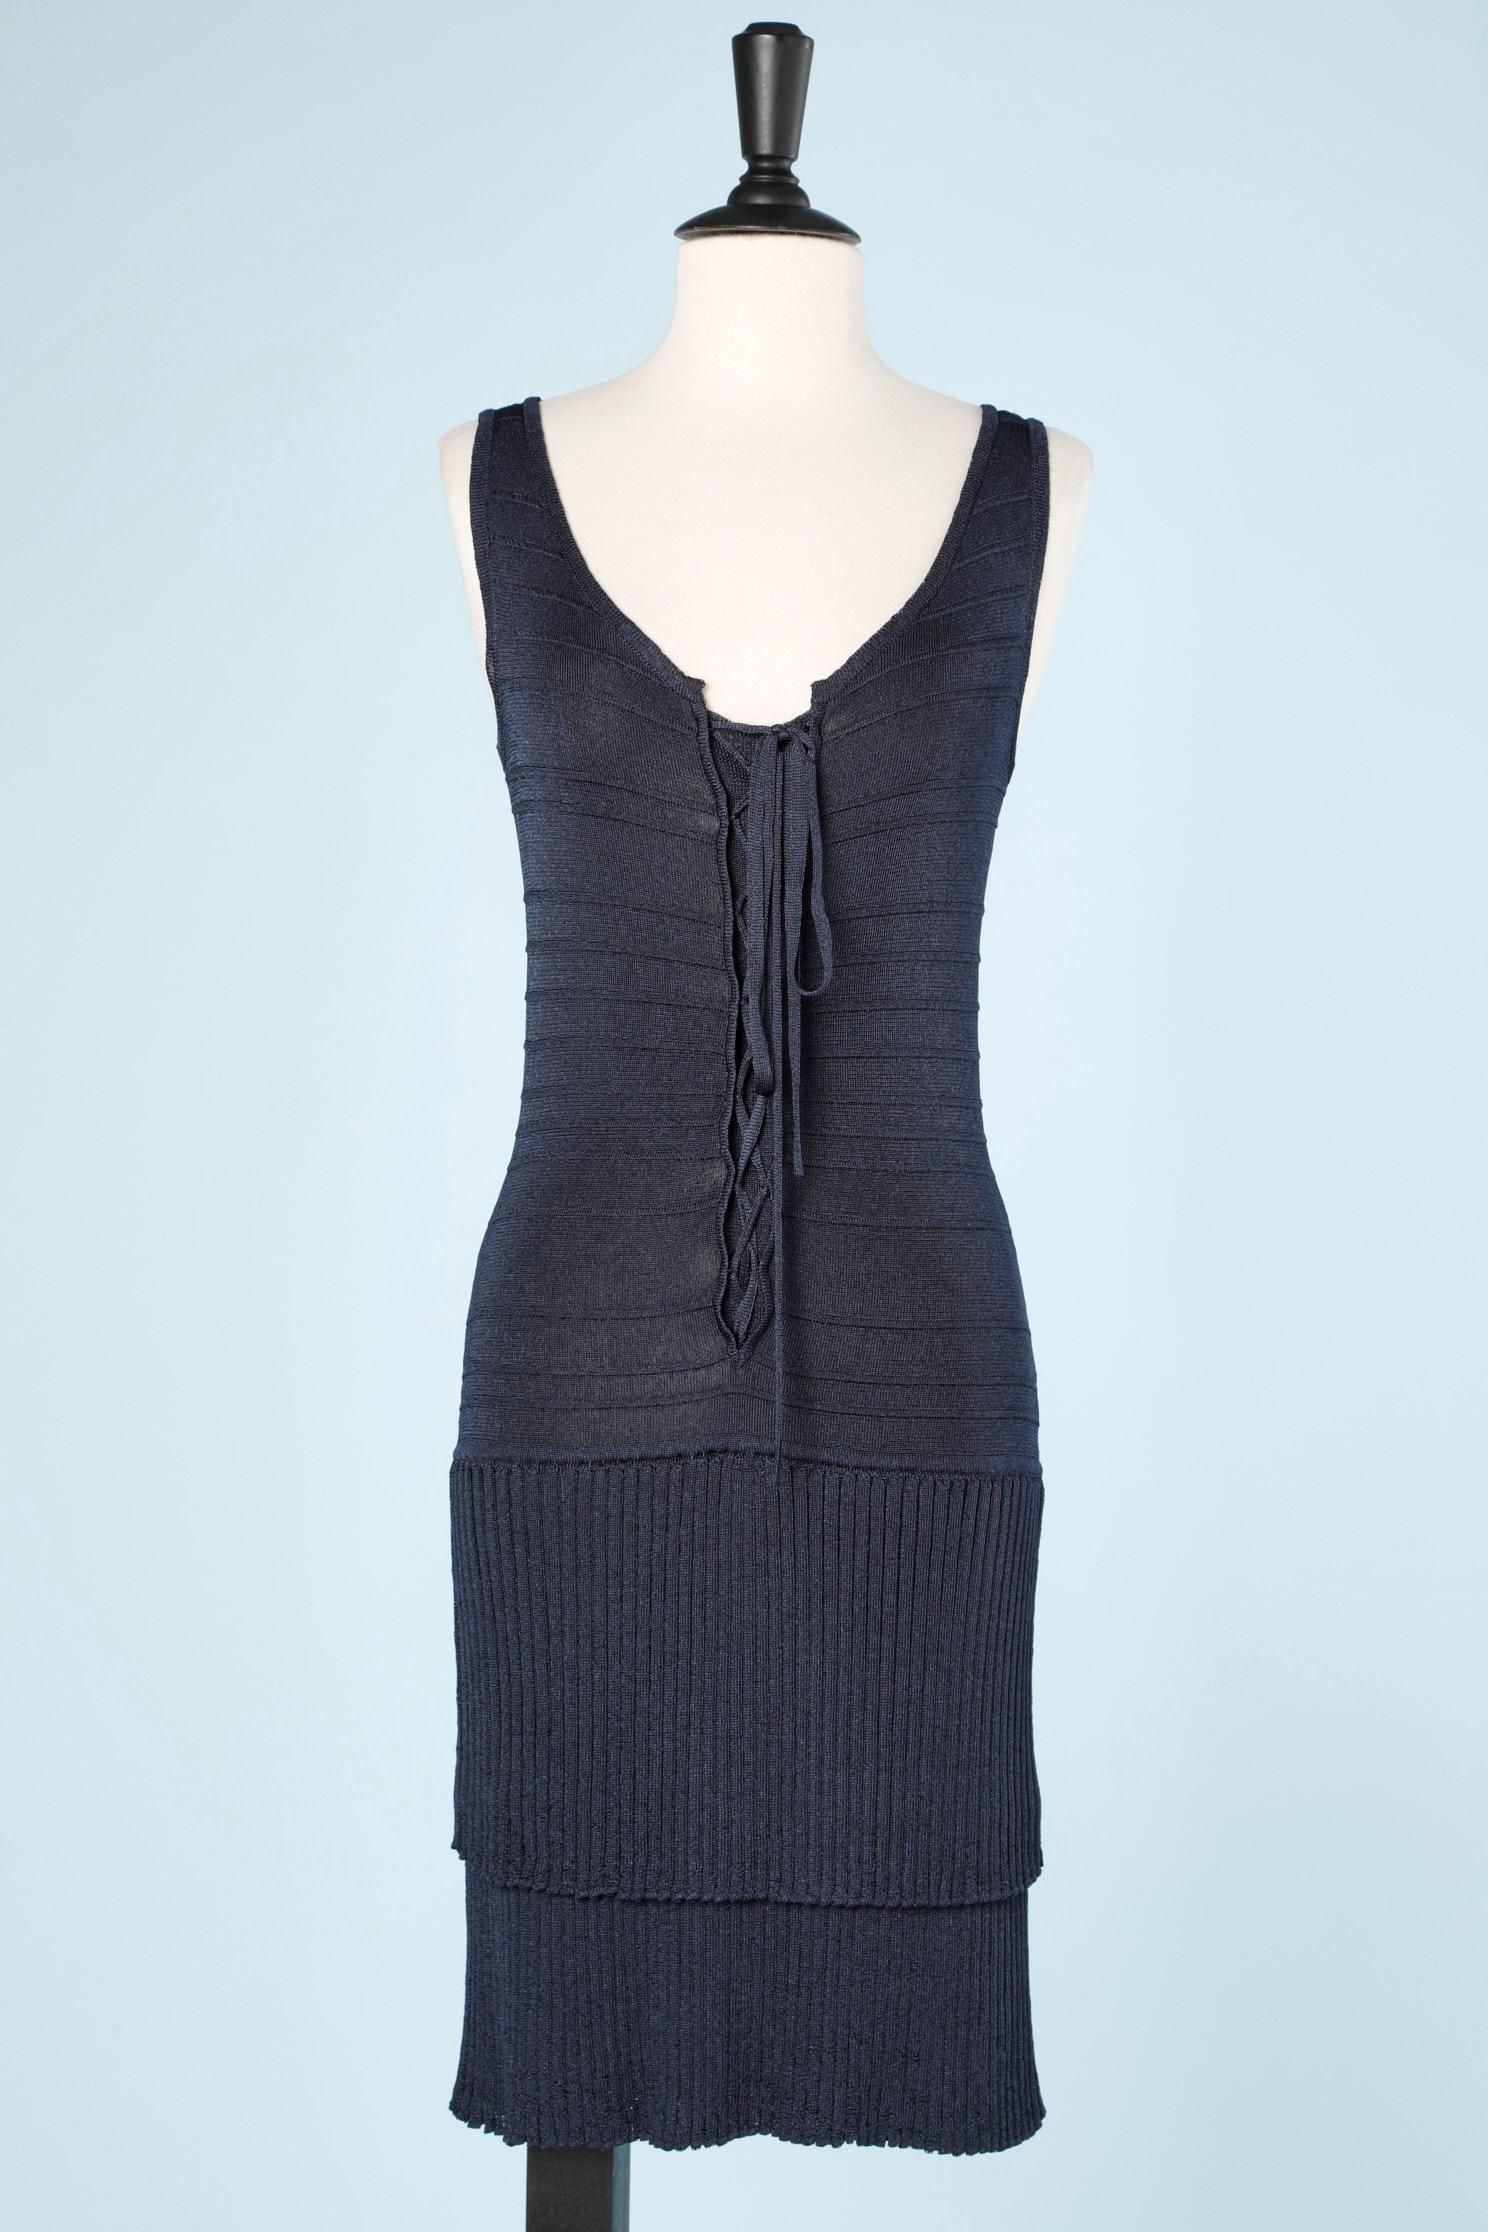 Black Dress and Boléro in navy blue viscose knit Luisa Spagnoli  For Sale